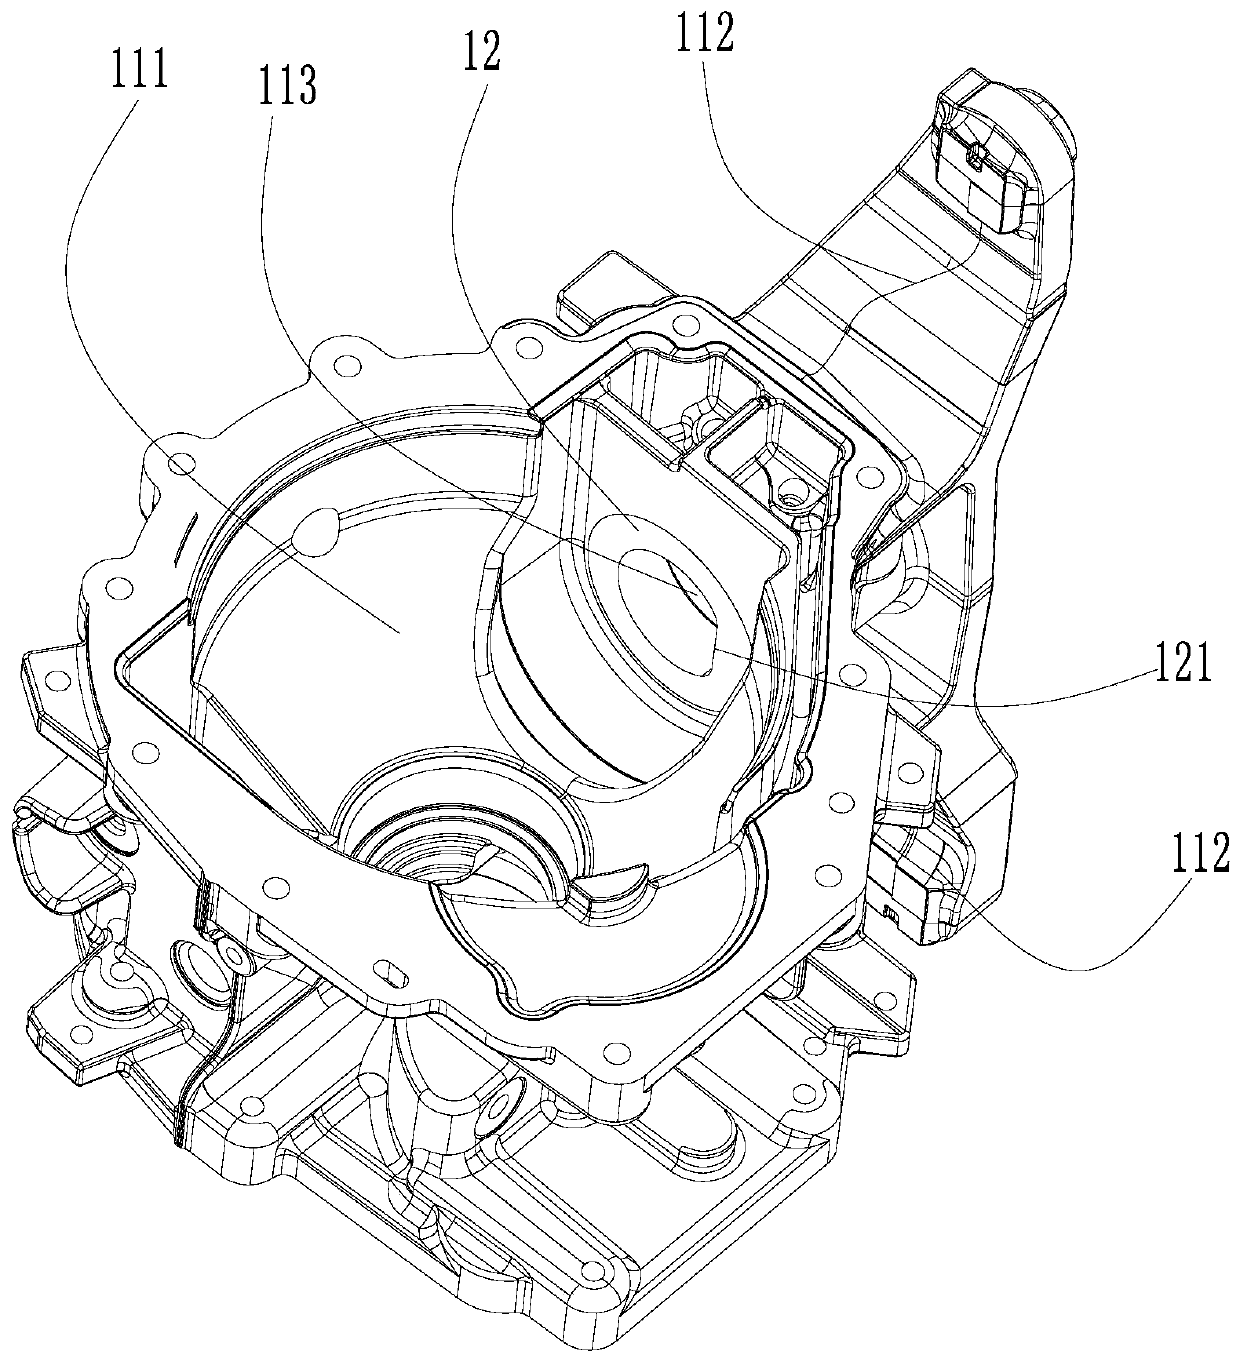 Automobile bracket with embedding part and die-casting die for forming automobile bracket